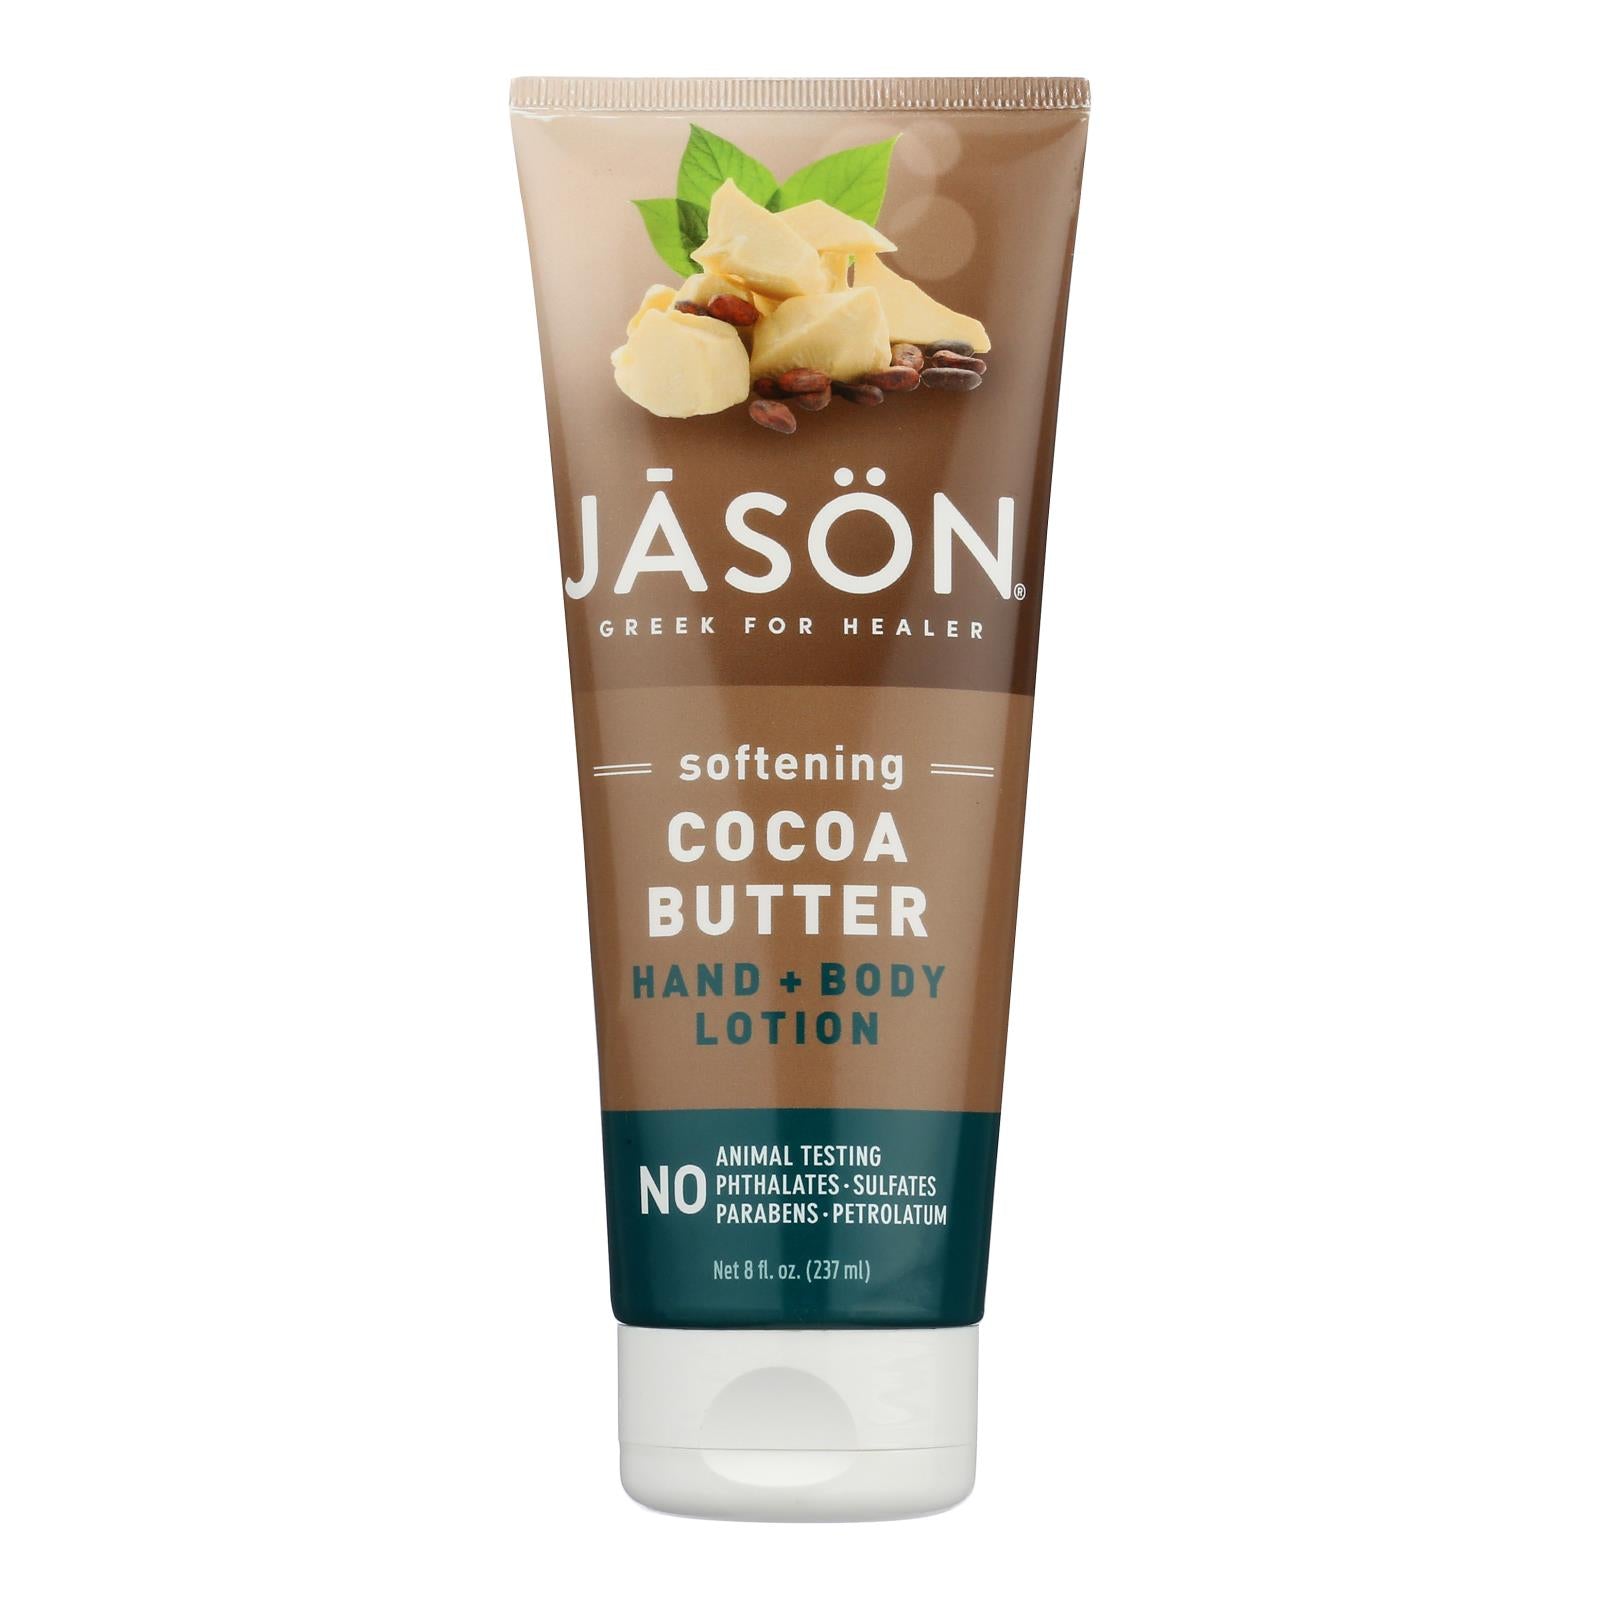 Jason Hand And Body Lotion Cocoa Butter - 8 Fl Oz